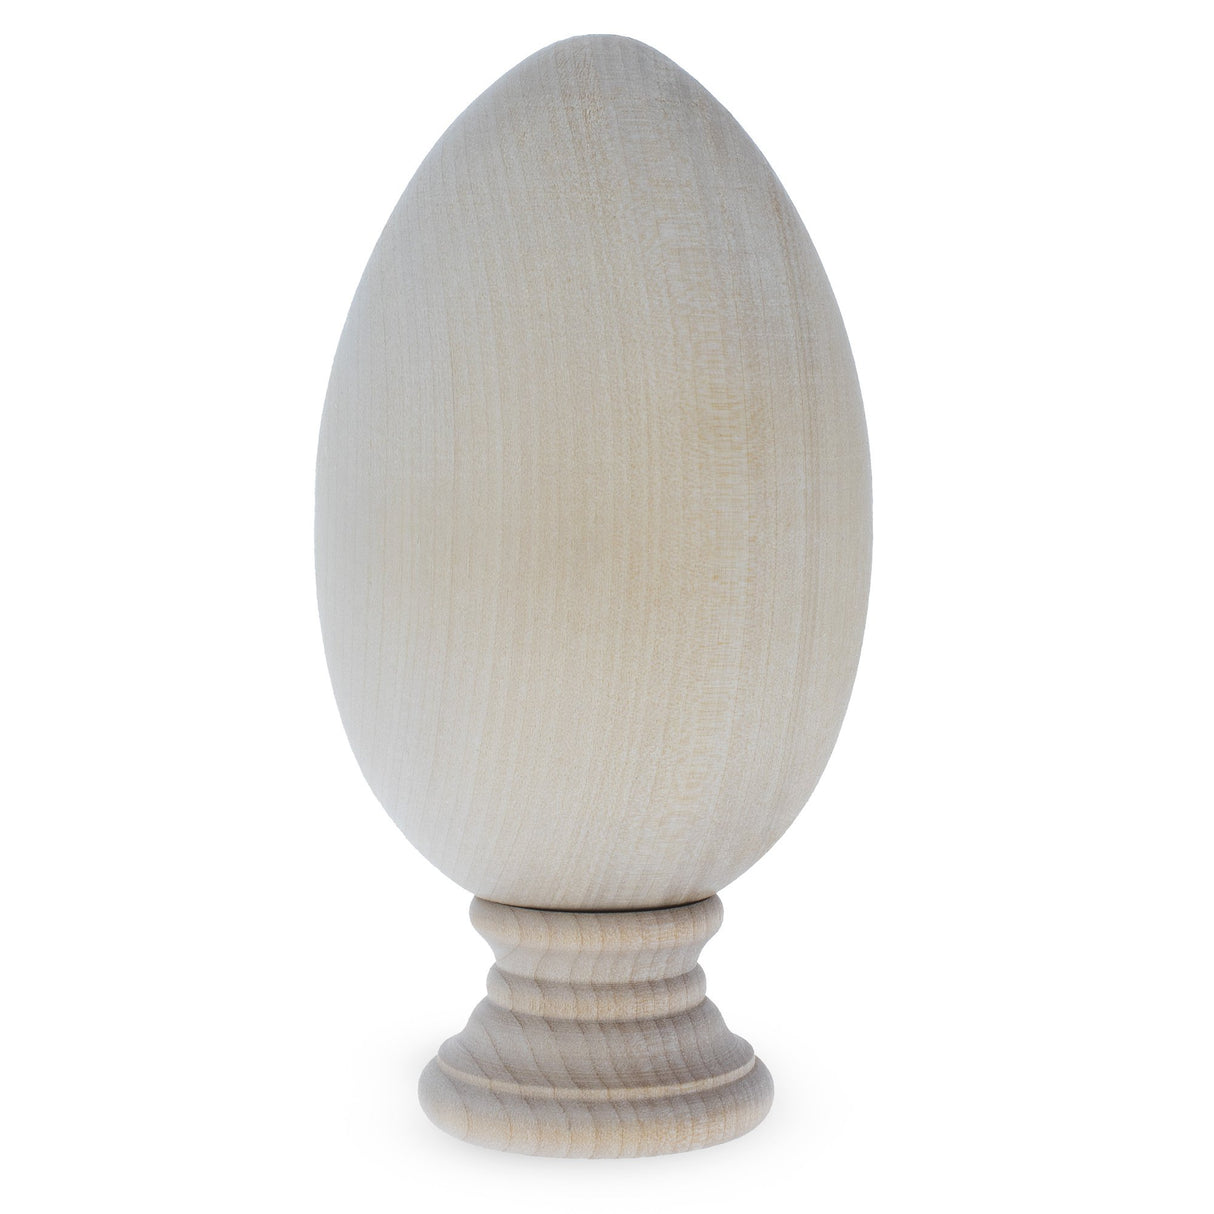 Unfinished Blank Goose Wooden Egg with Detachable Stand 4.25 Inches in Beige color, Oval shape